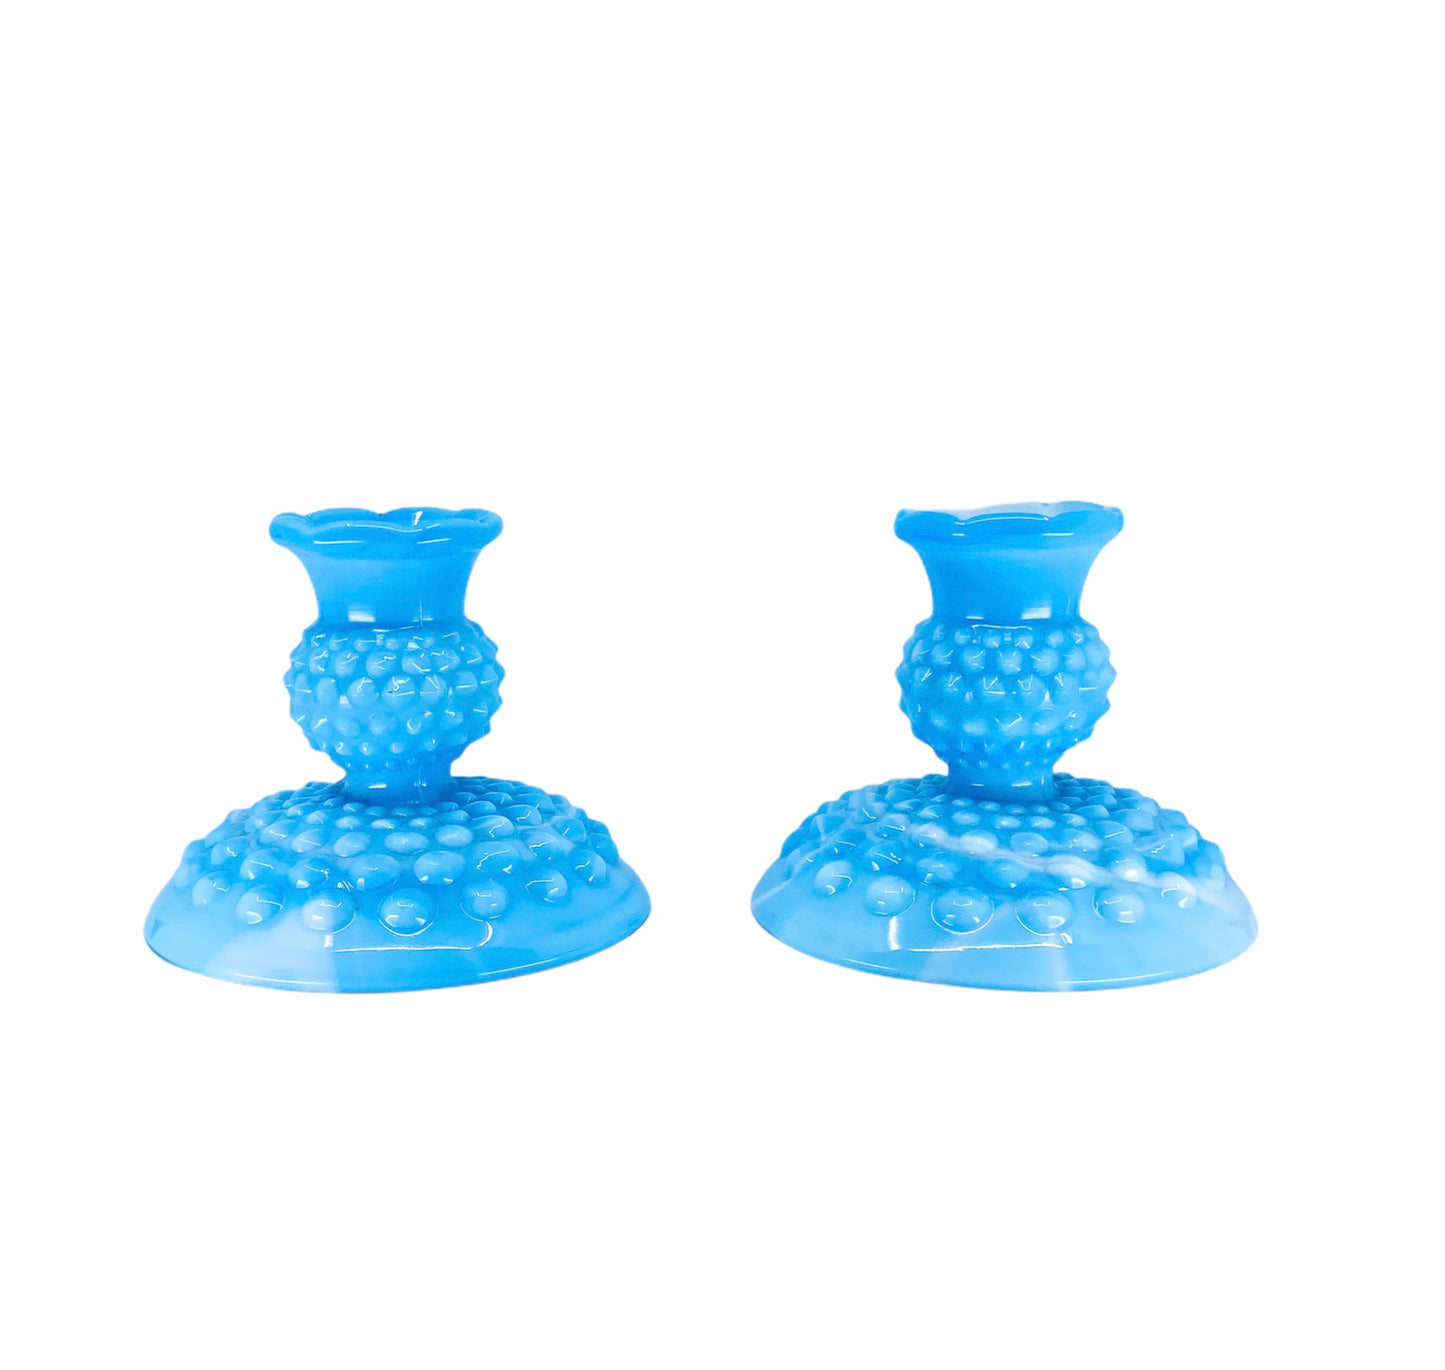 S/2 Fenton Blue Hobnail Candle Holders